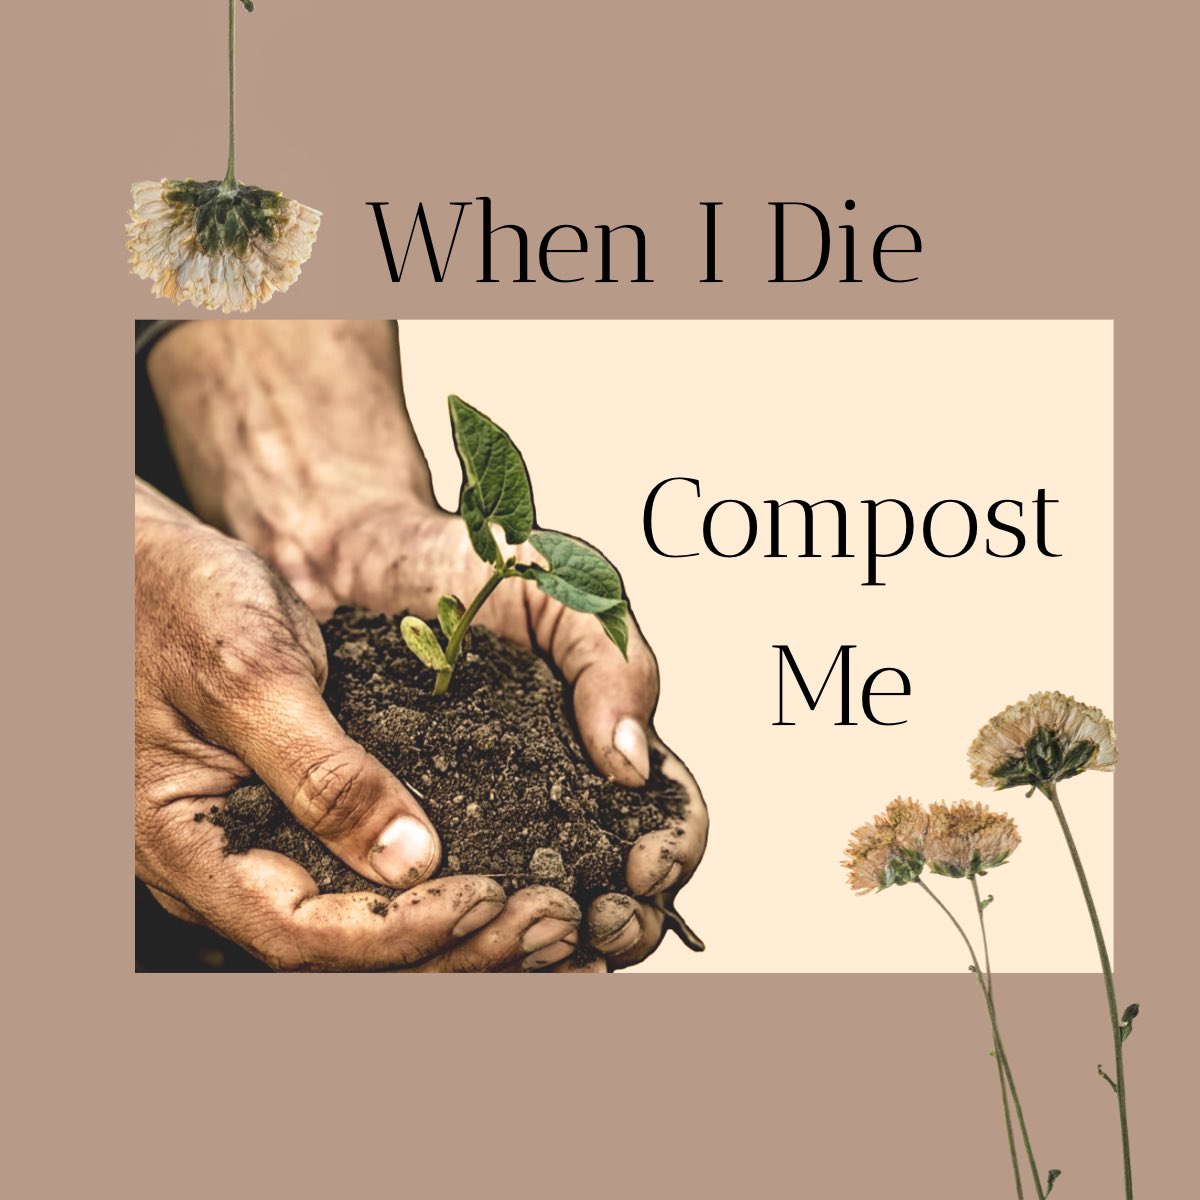 🚨 URGENT CALL TO ACTION Your help is needed to legalize composting in New York! The Green Cemeteries Bill: A382 which would allow for human composting may be on Governor Hochul’s desk for her signature today.